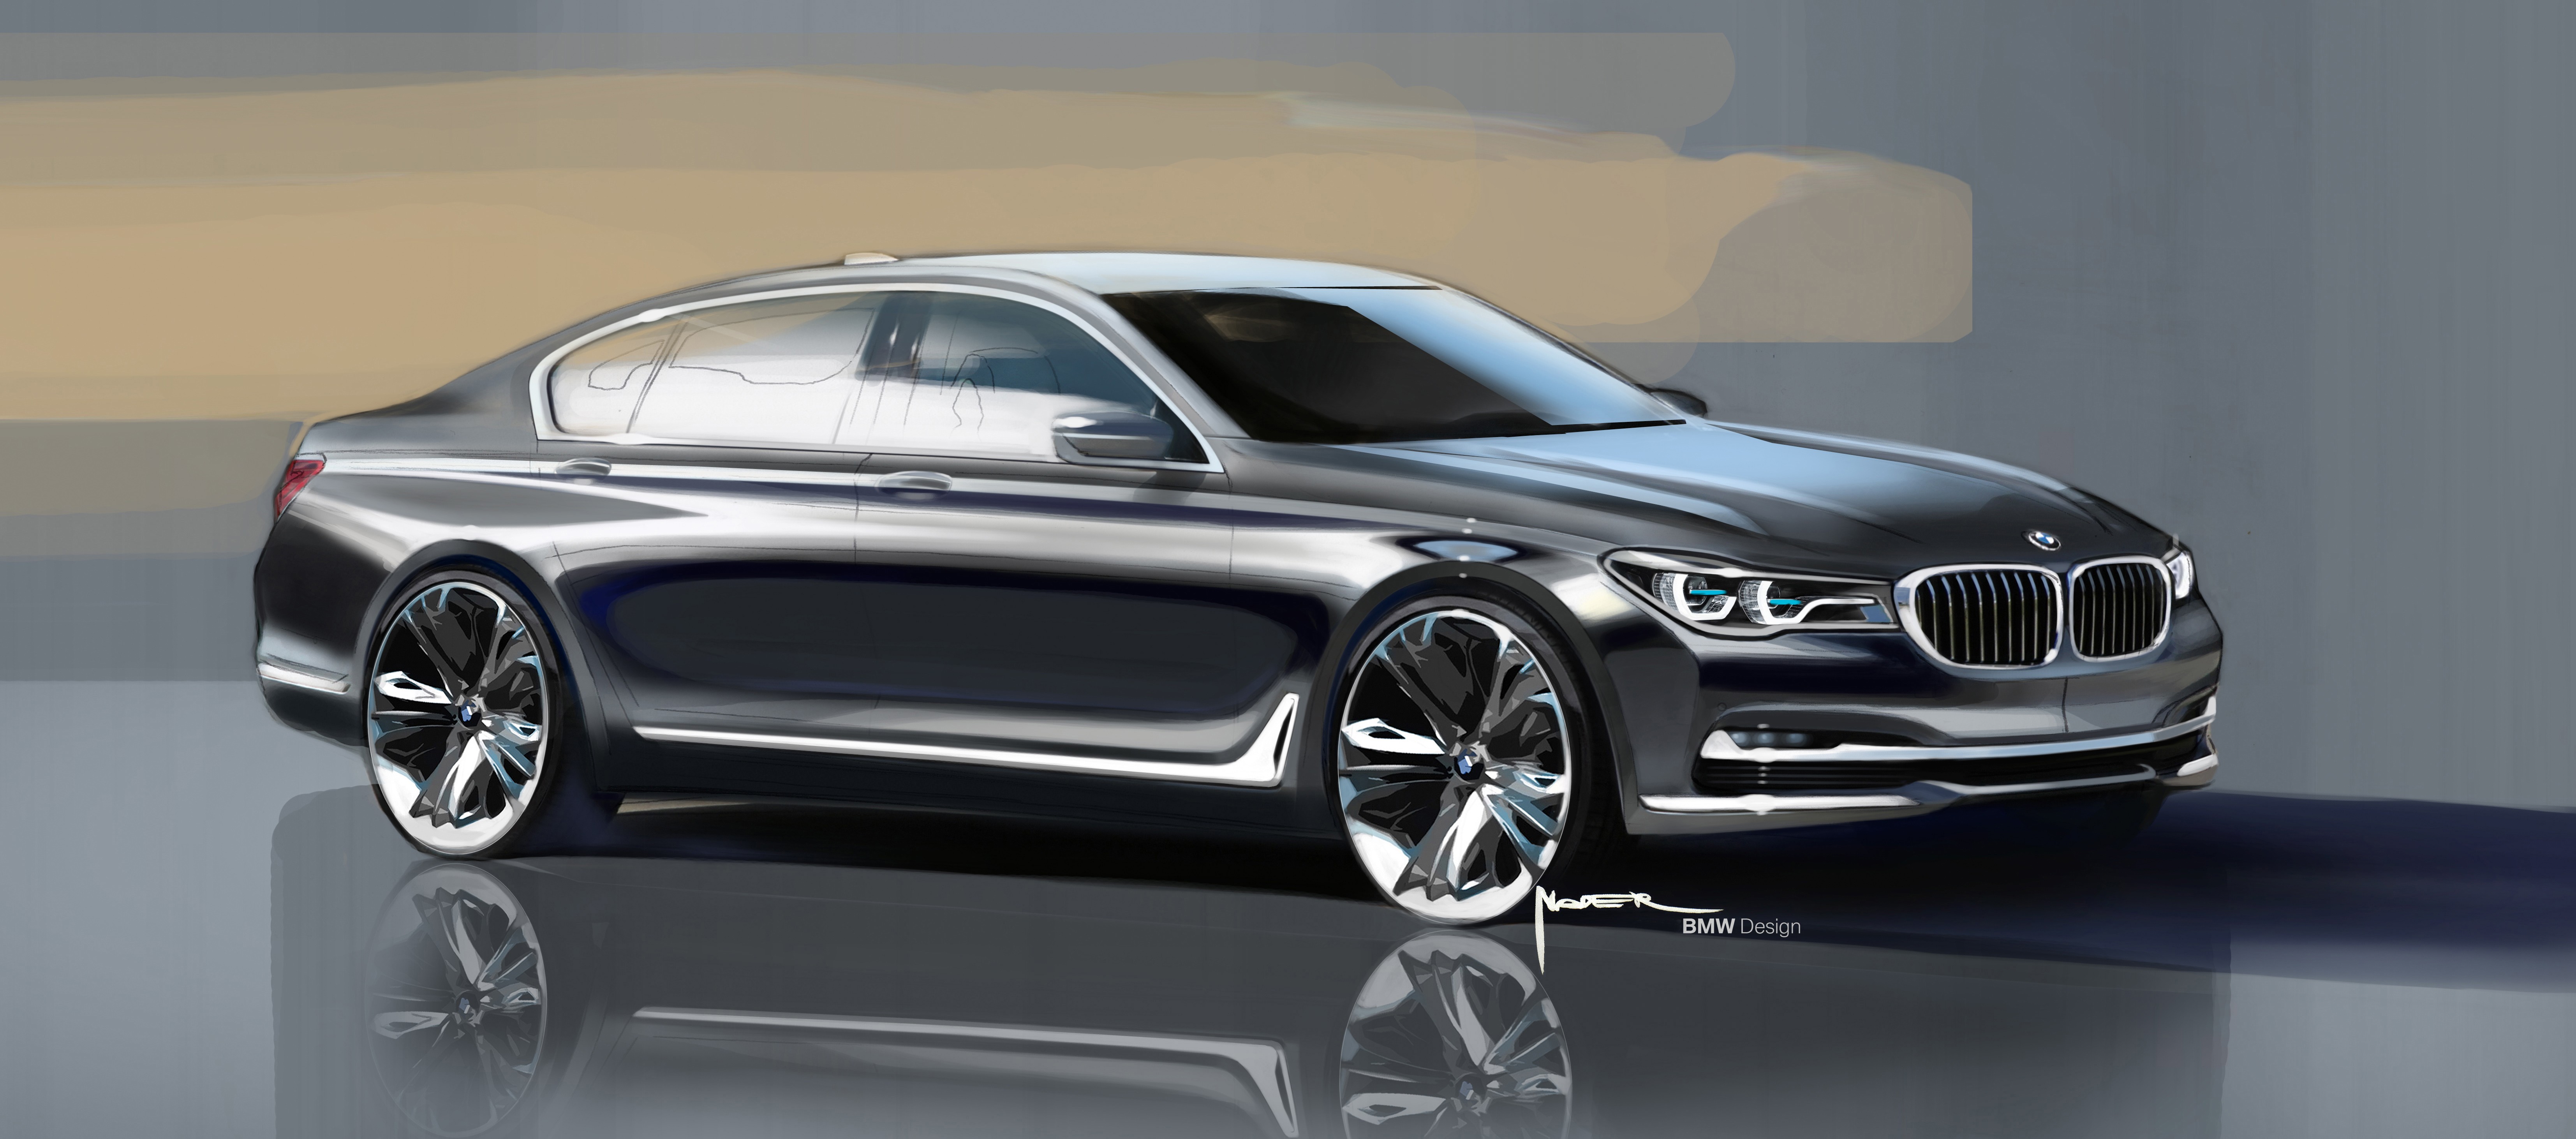 Free Download Bmw 7 Series 2016 Hd Wallpapers Download 6614x2924 For Your Desktop Mobile Tablet Explore 97 Bmw 7 Wallpapers Bmw 7 Wallpapers Bmw 7 Series Wallpapers Bmw 7 Series Wallpaper